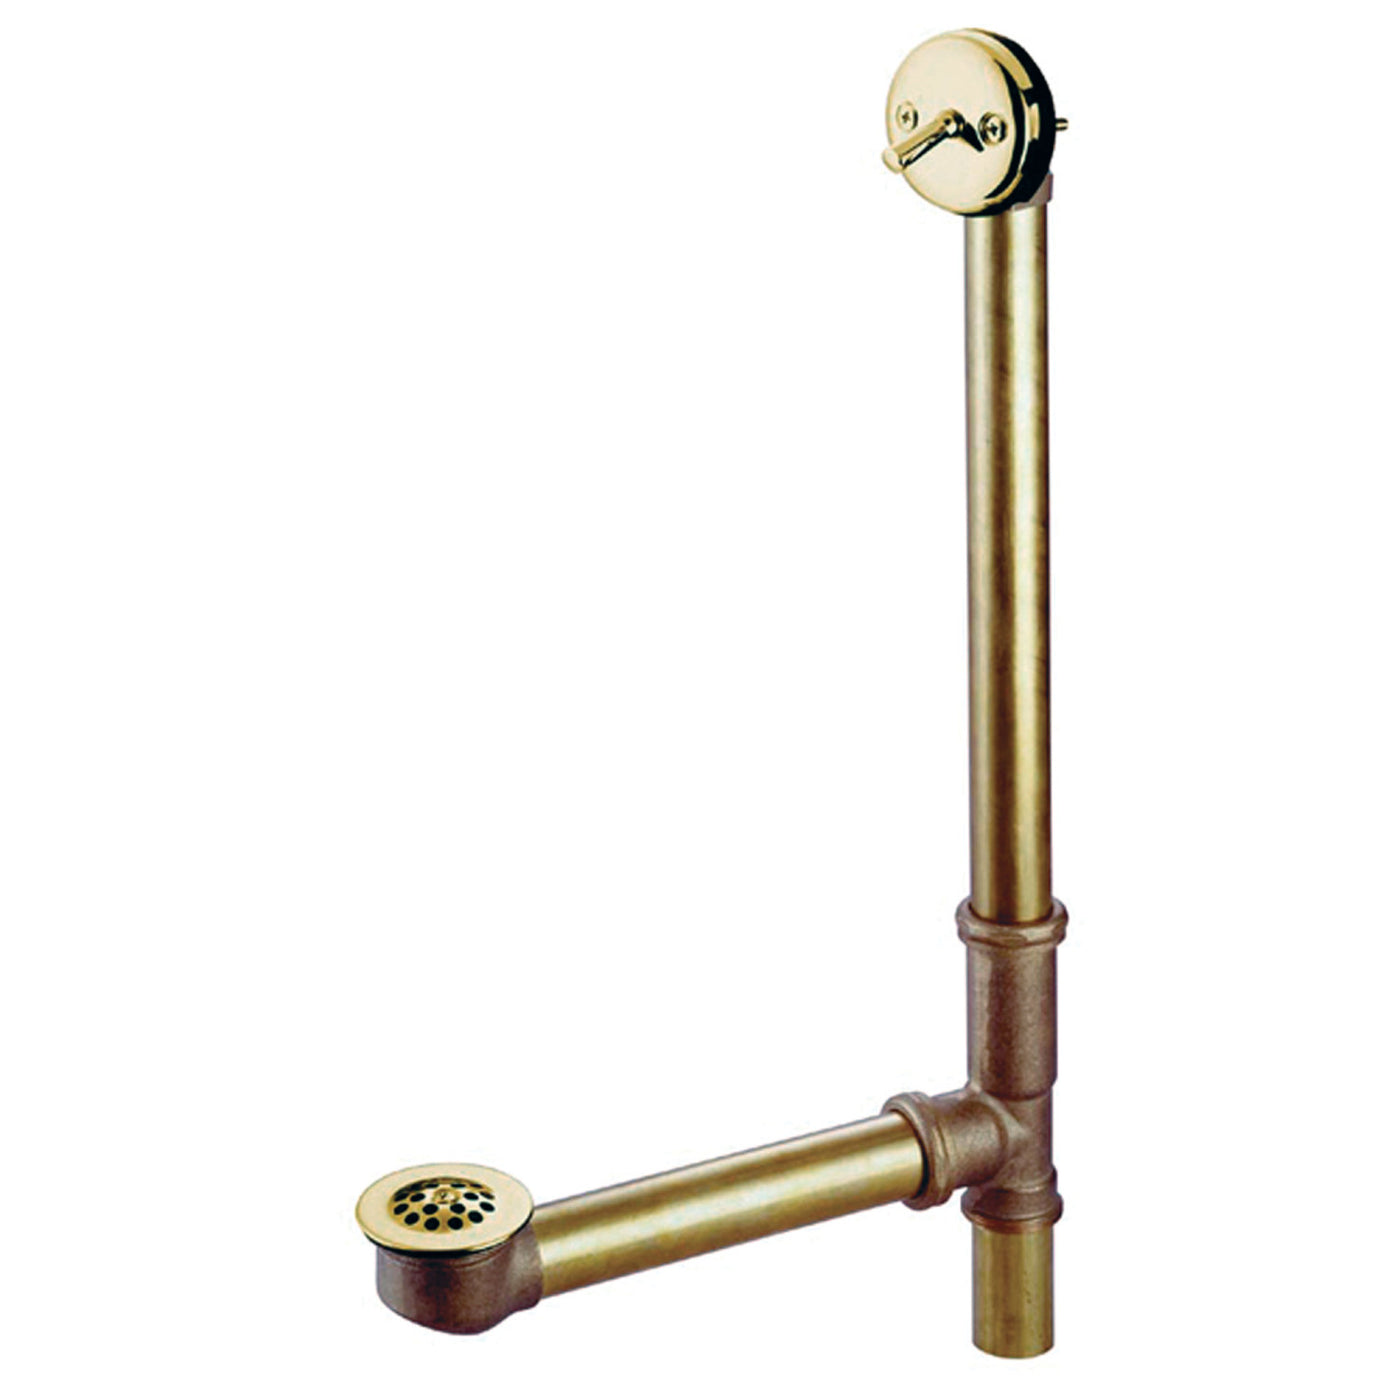 Elements of Design EDTL1182 23-Inch Trip Lever Waste and Overflow with Grid, 20 Gauge, Polished Brass